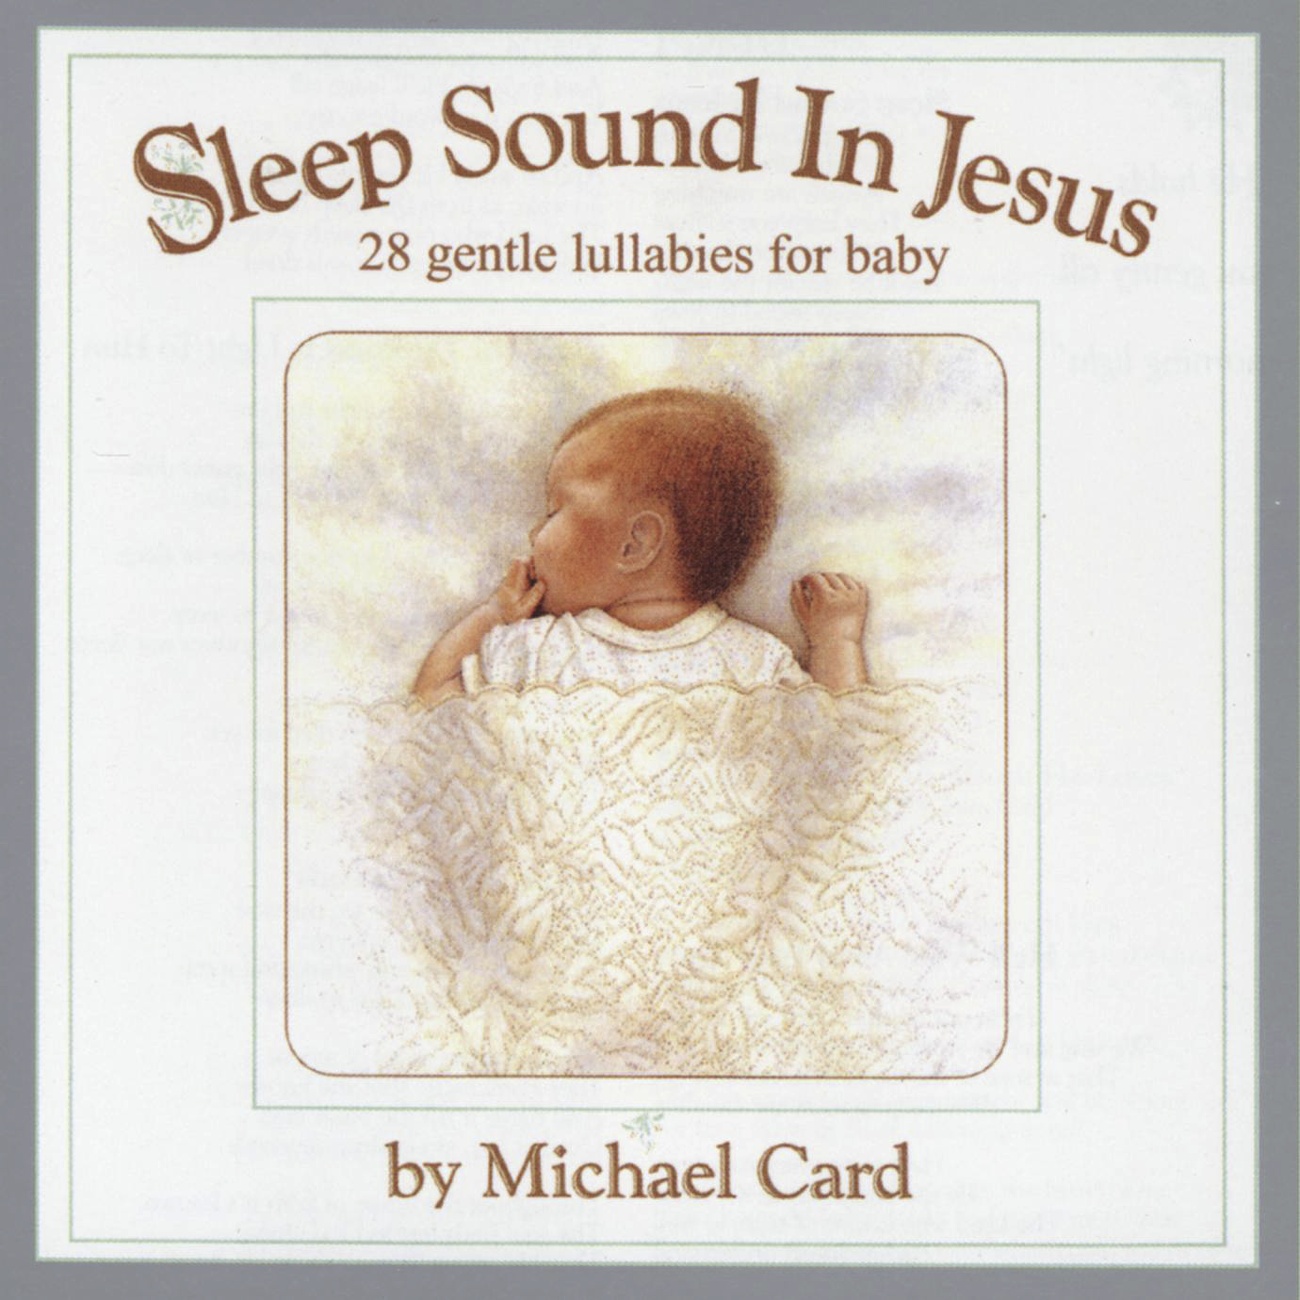 A Song For The Night  (Sleep Sound In Jesus Platinum Album Version)